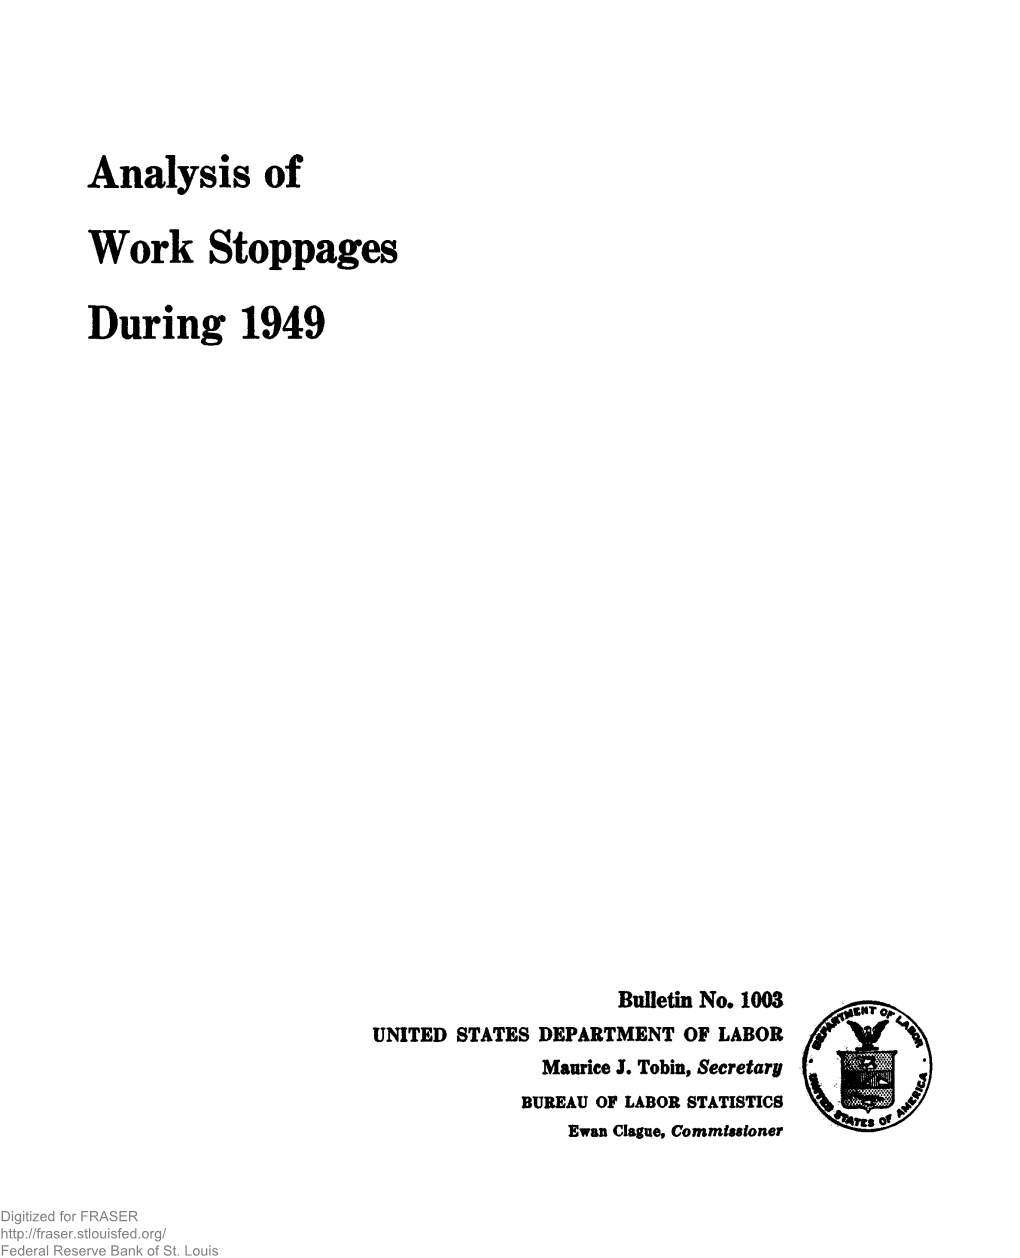 Analysis of Work Stoppages During 1949